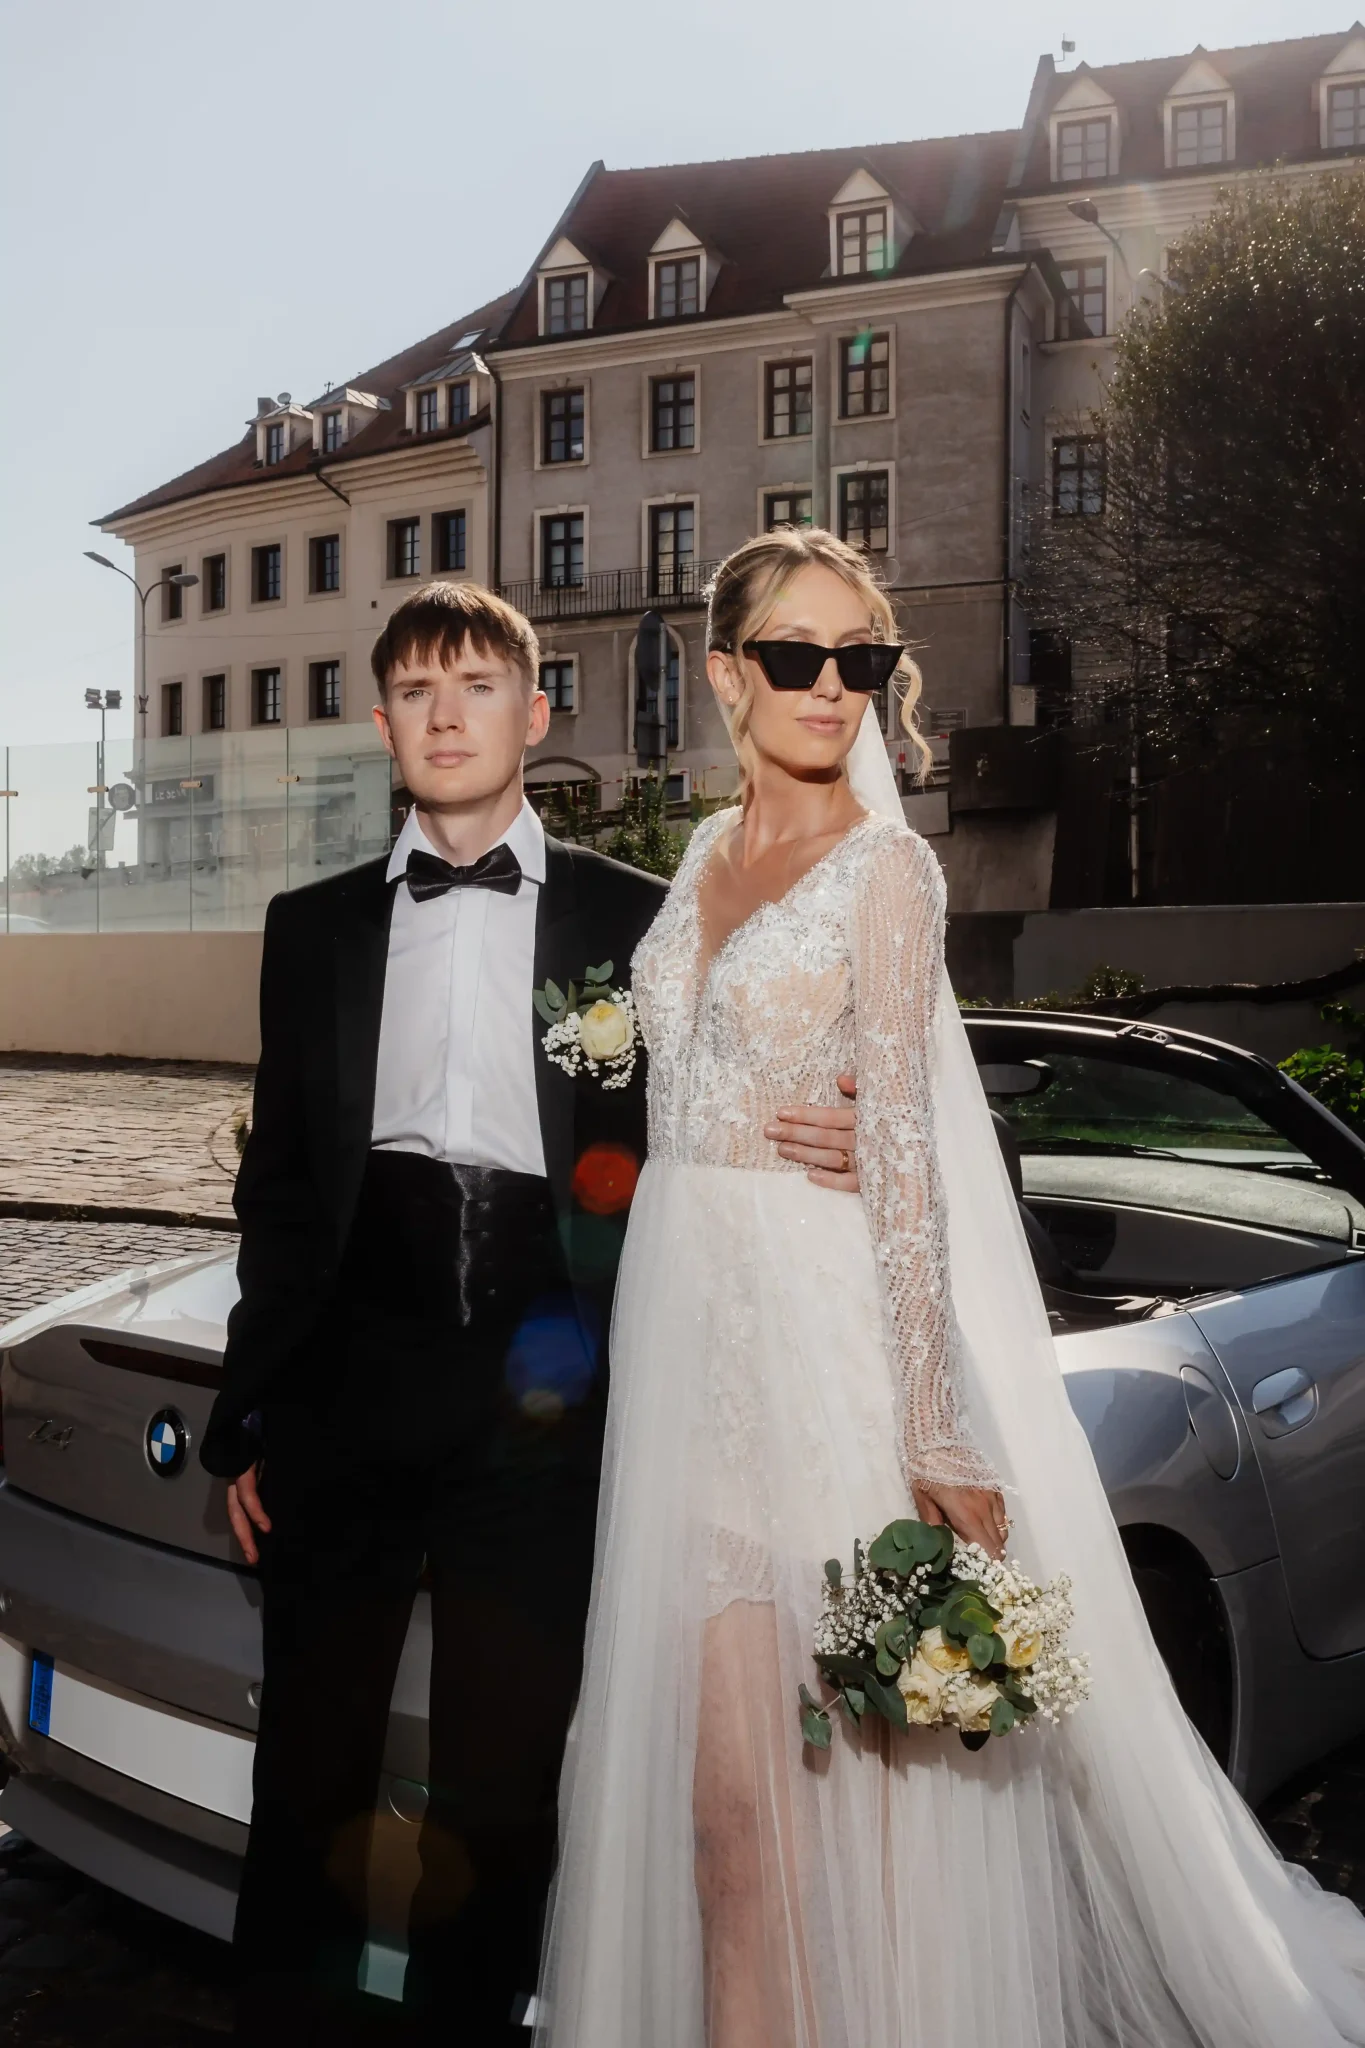 A bride and groom standing next to a bmw sports car.